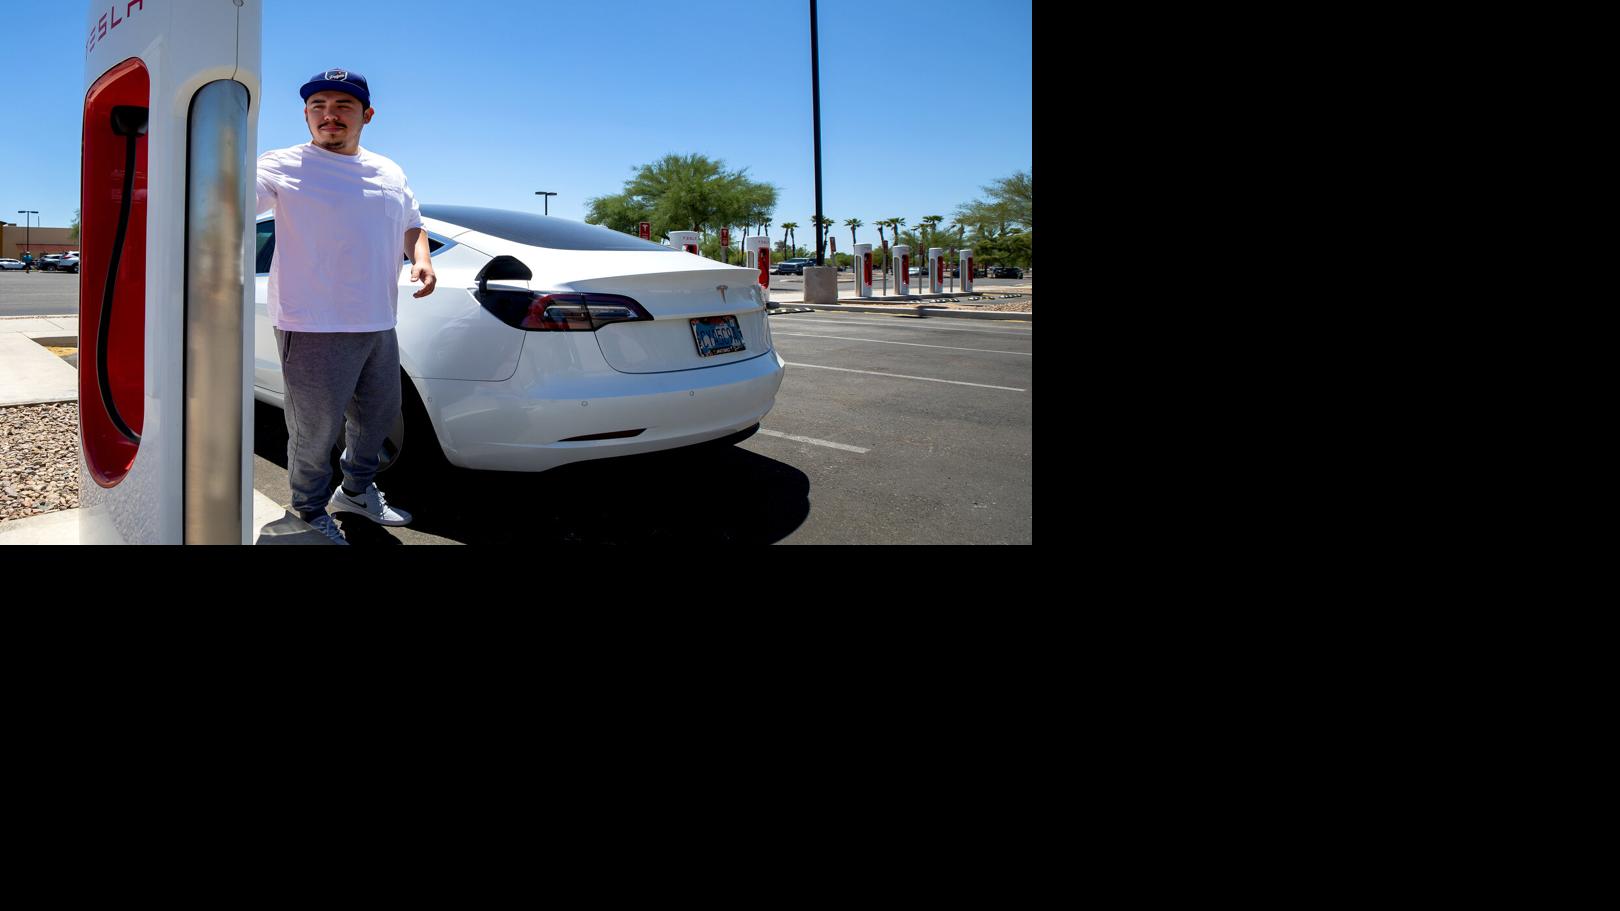 Tucson's proposed electric vehicle rules called too aggressive